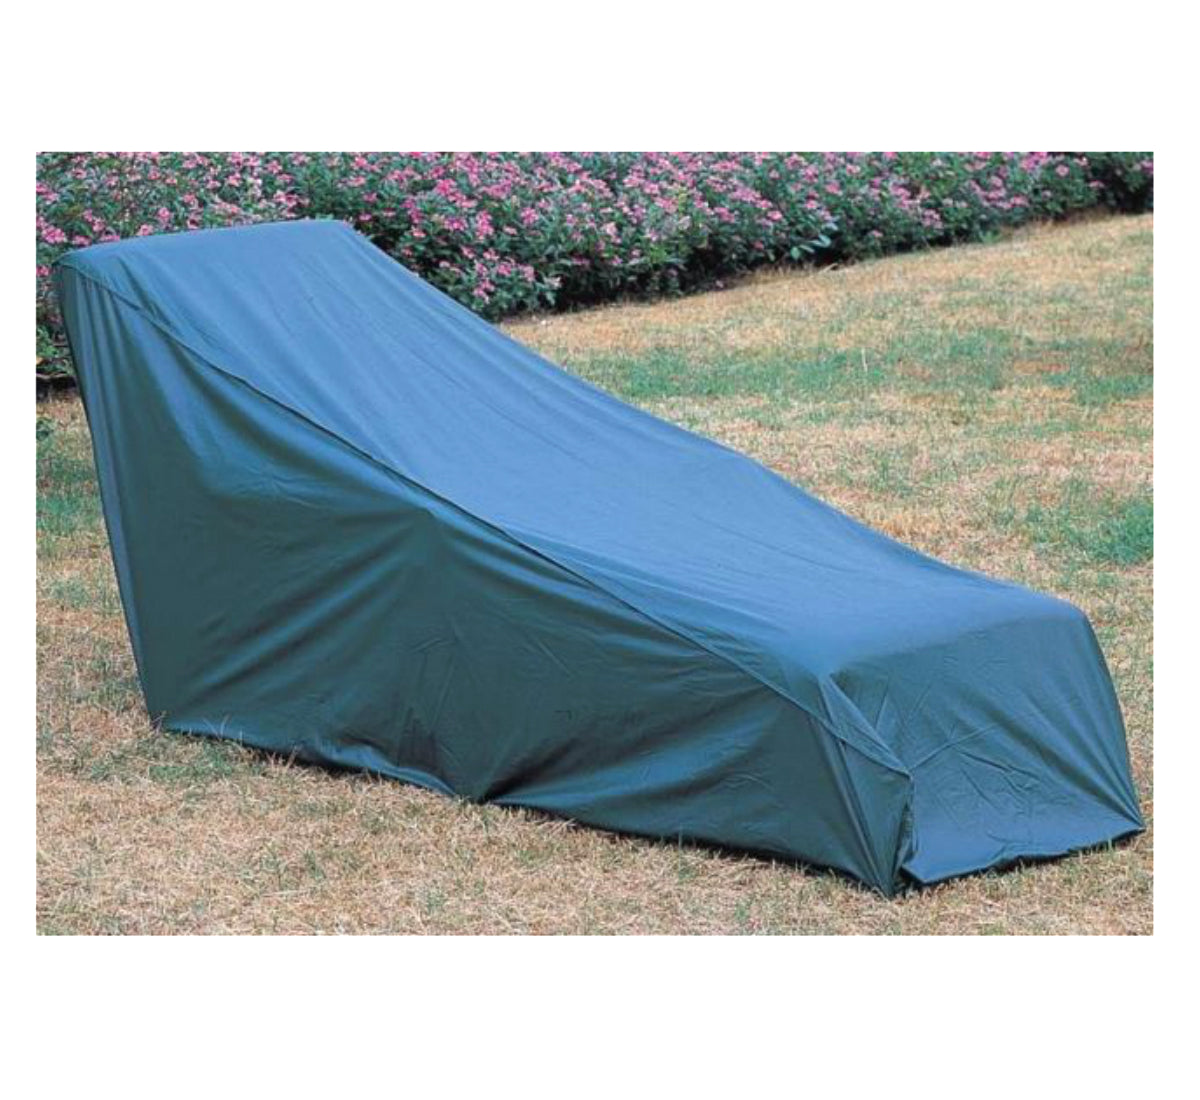 buy outdoor furniture covers at cheap rate in bulk. wholesale & retail outdoor cooler & picnic items store.